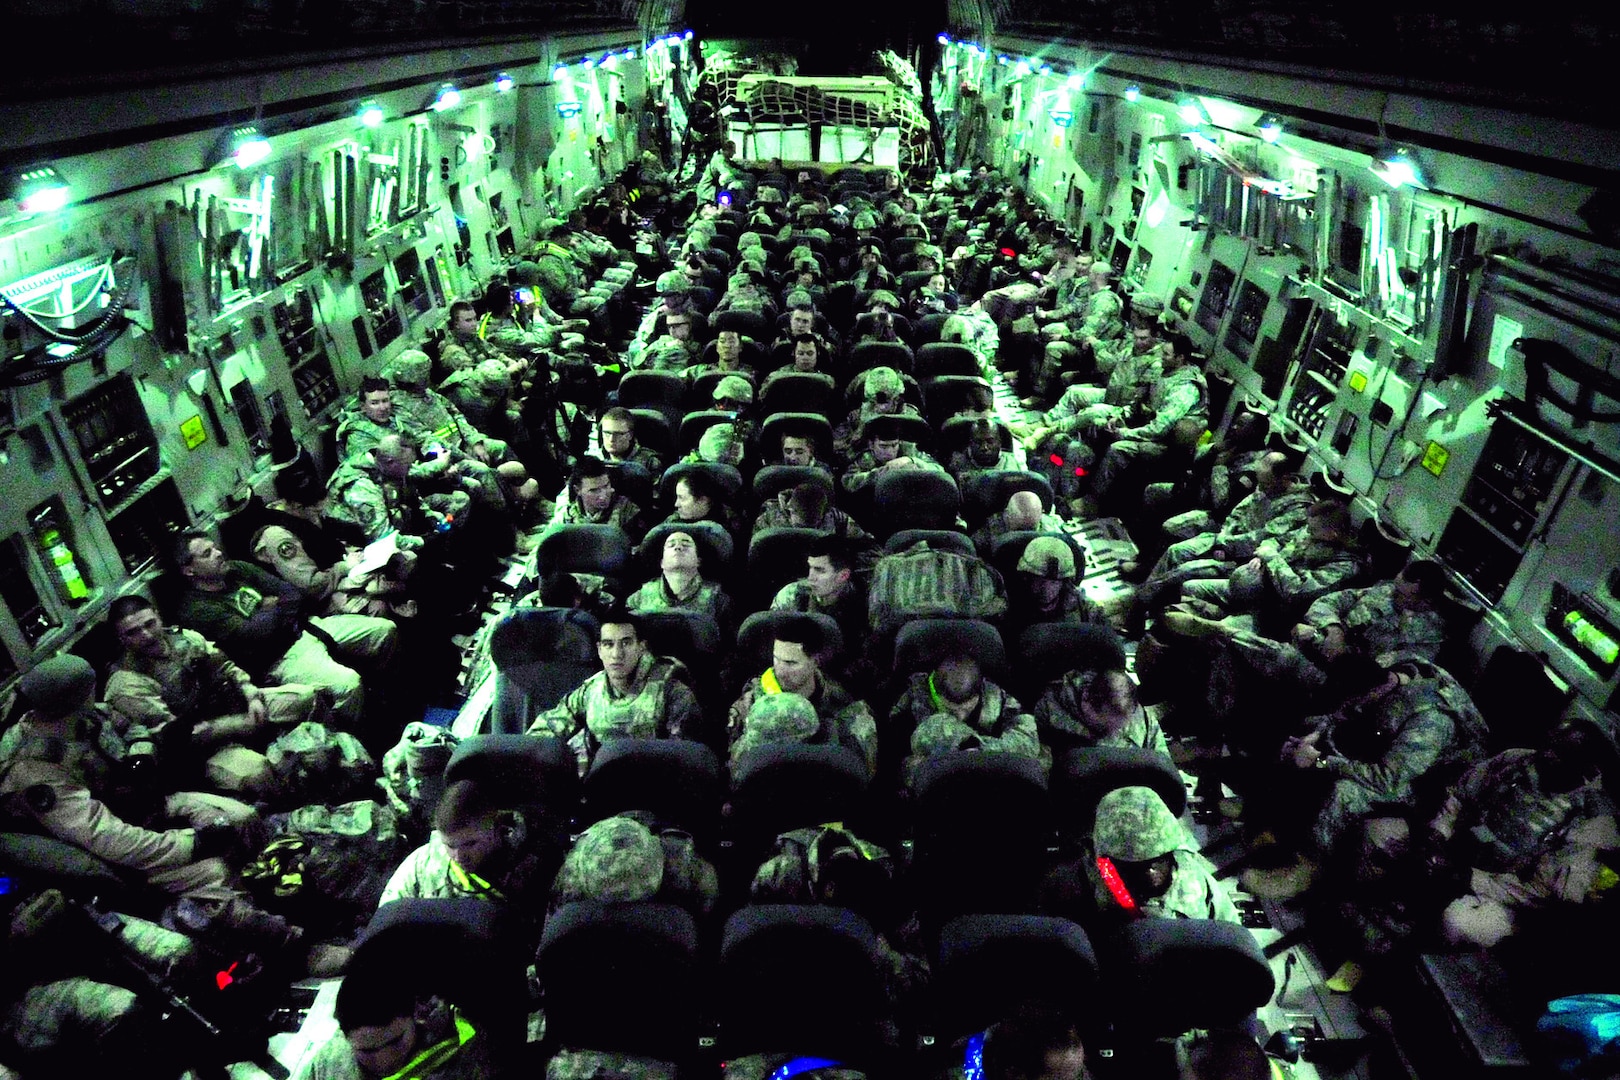 Airmen of the 407th Air Expeditionary Group prepare to take-off on a  C-17 Globemaster III cargo aircraft at Ali Air Base, Iraq, Dec. 18, 2011. These  Airmen are the last service members to fly out of  Iraq.  The last remaining U.S. Airmen left Iraq per the Iraq and U.S. 2008 Security Agreement that required all U.S. service members to be out of the country by  Dec. 31. Since 2003, more than 1 million Airmen, Soldiers, Sailors and Marines have served in Iraq. (U.S. Air Force photo/Master Sgt. Cecilio Ricardo)